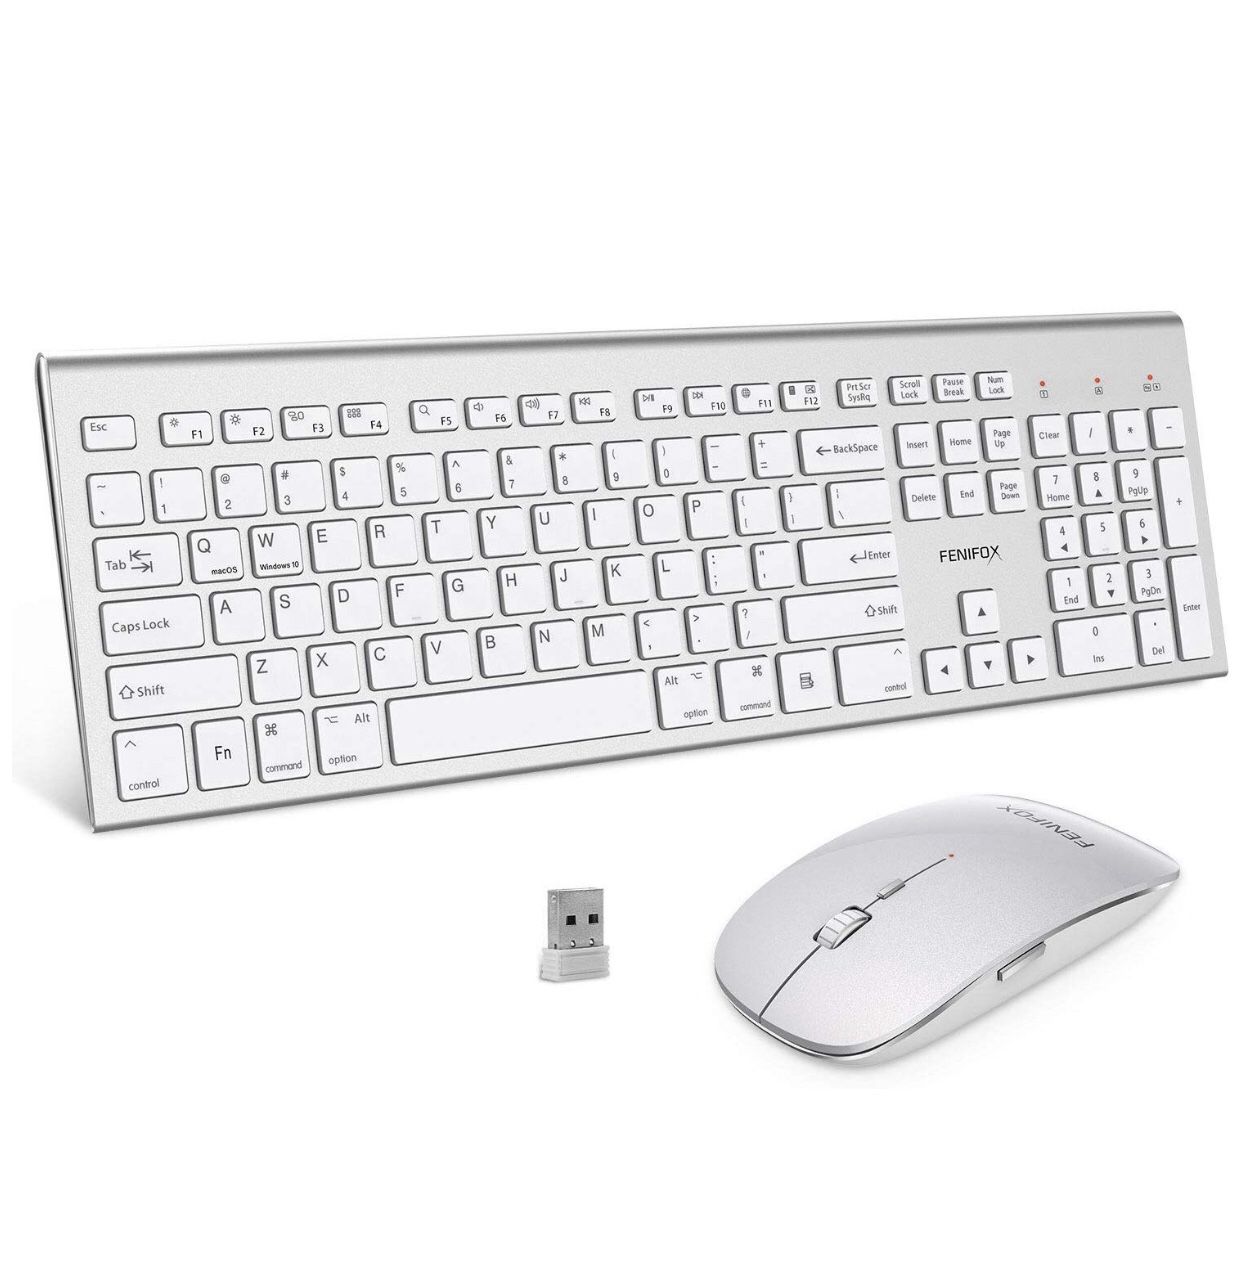 Wireless keyboard and mouse combo, double switching ergonomic system, full size silent USB, compatible with MacOS Windows 10 desktop PC (silver white